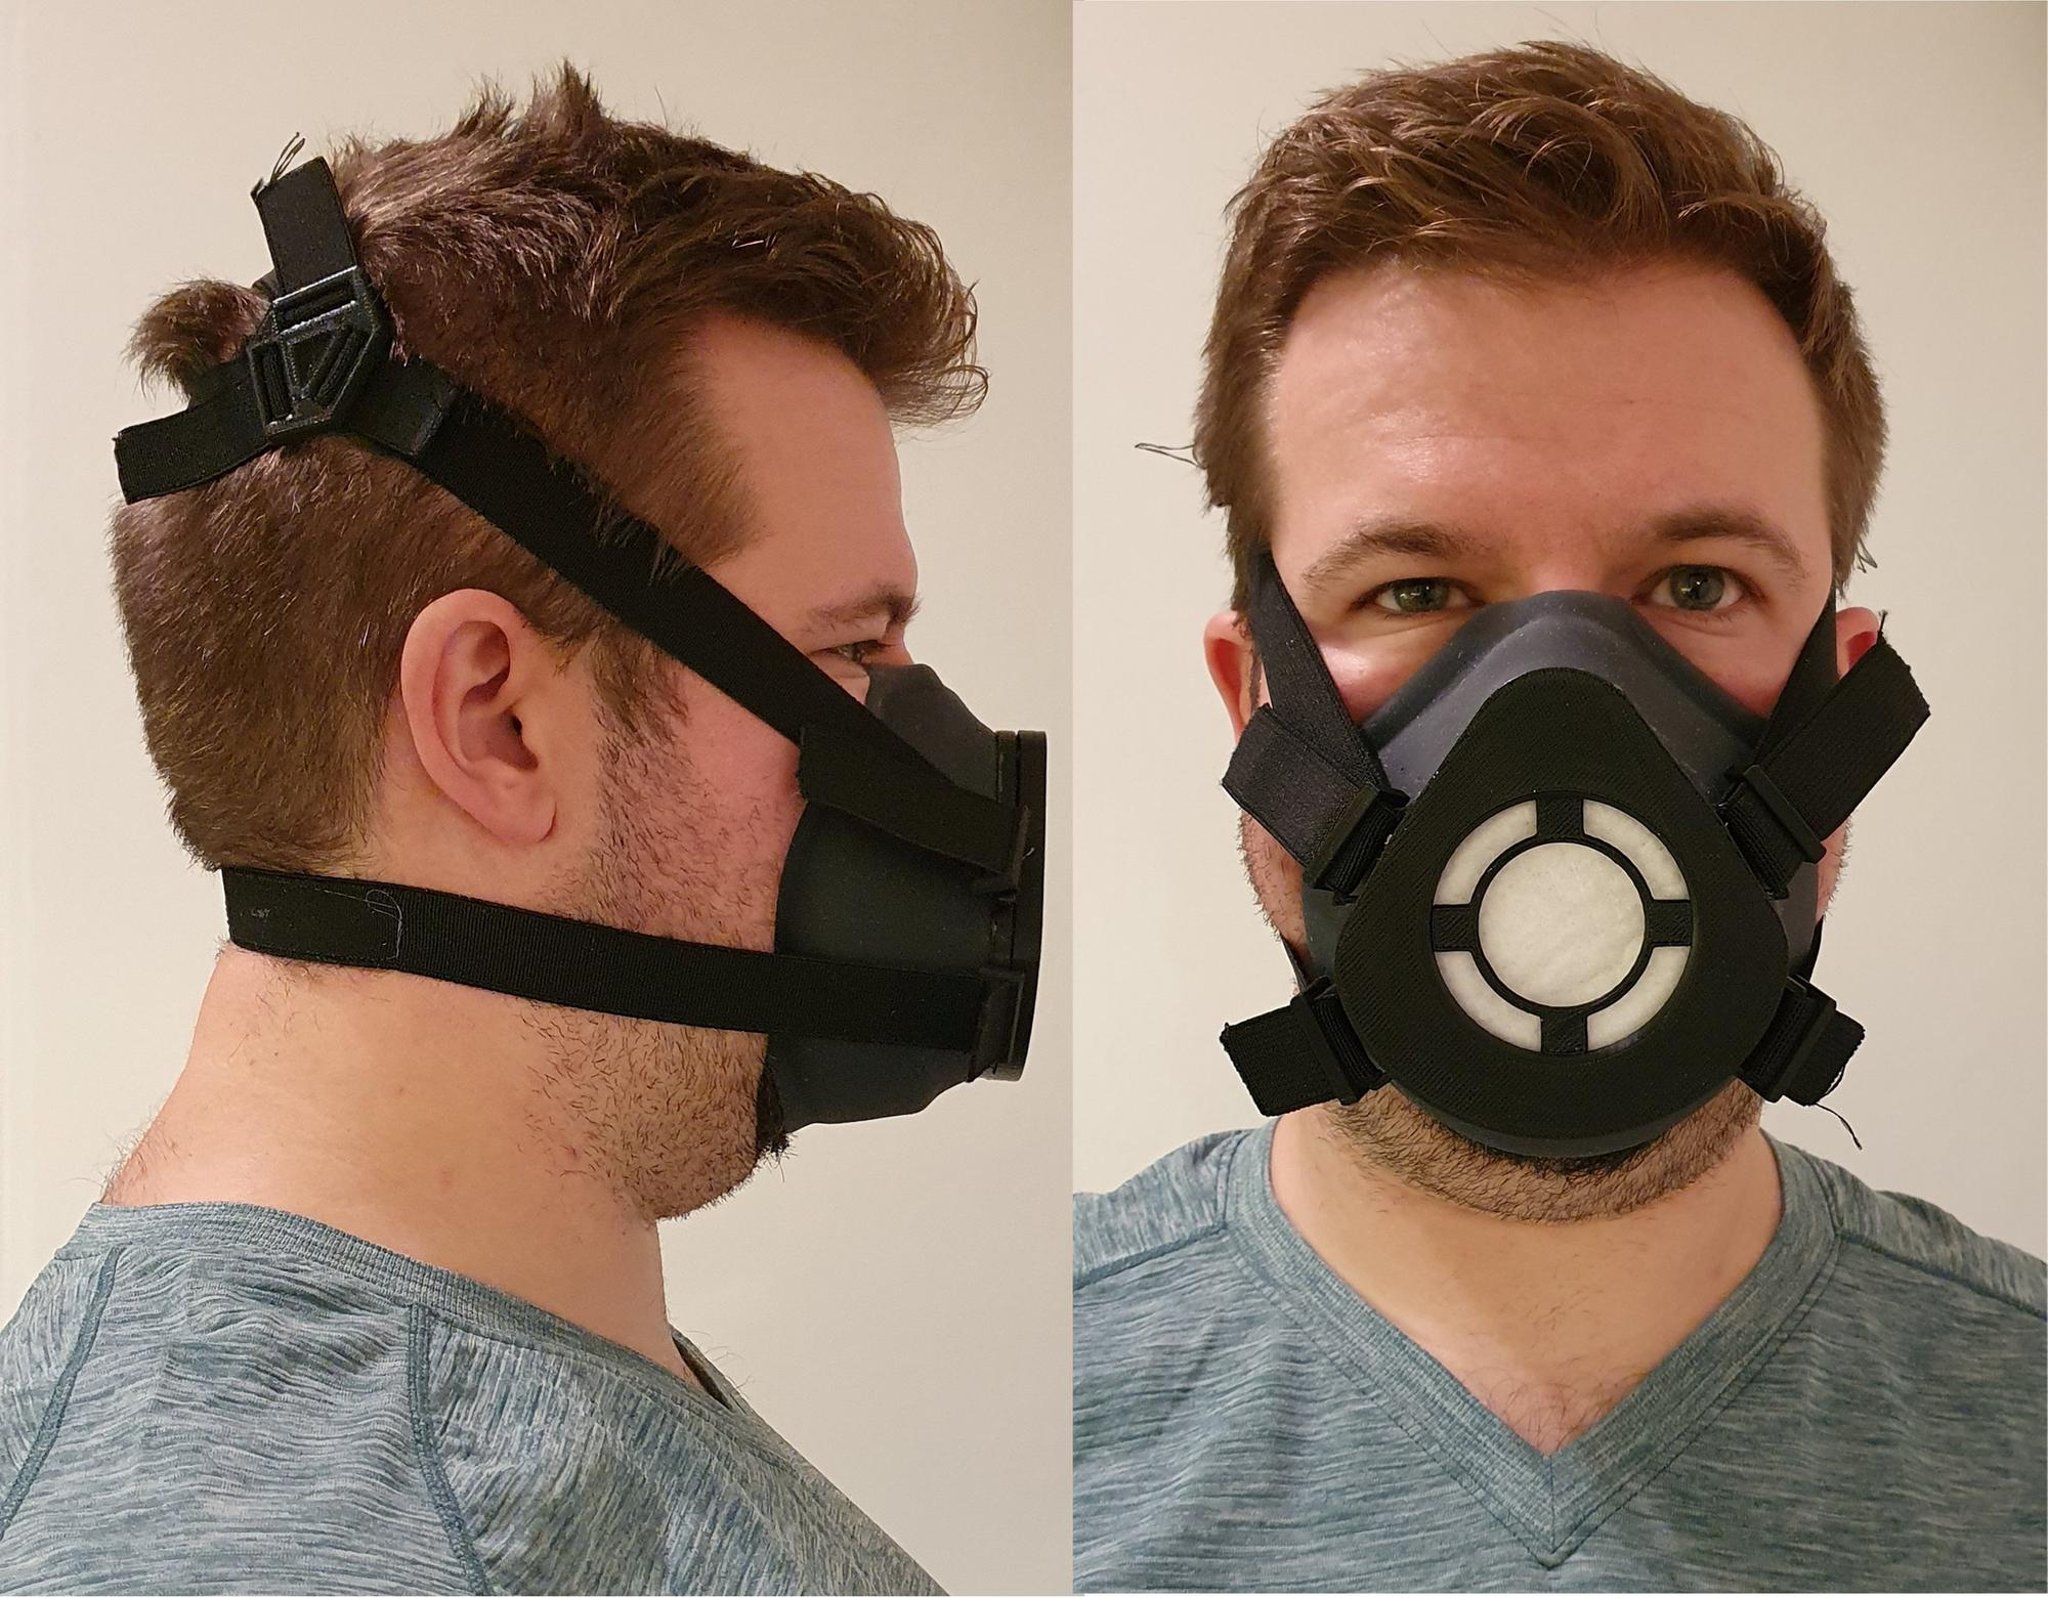 Edinburgh scientists use smartphones to create new pandemic face masks